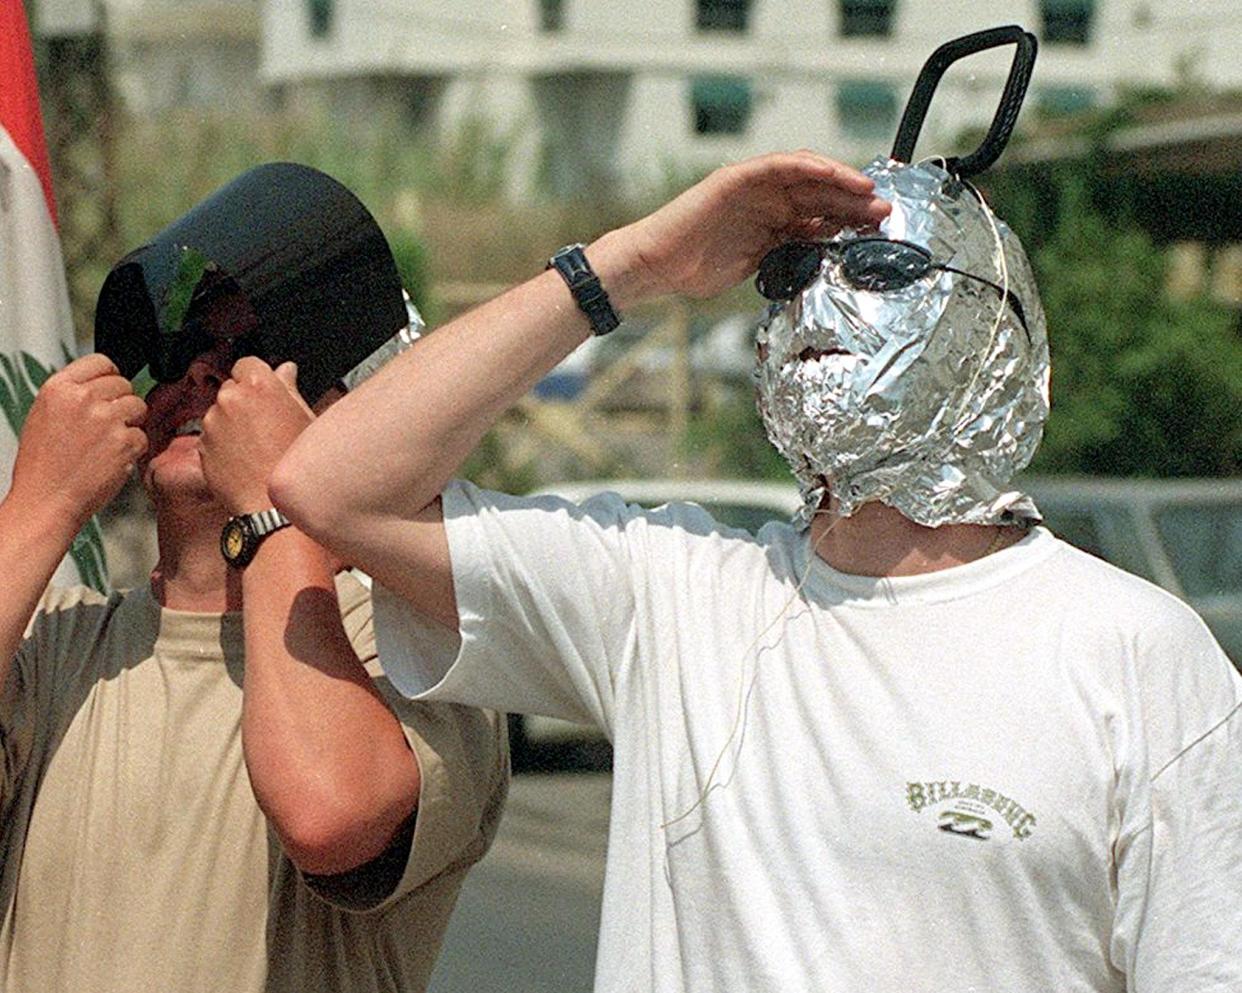 1999: Eclipse watchers in Beirut find novel means of protecting ther eyesight while viewing the last total solar eclipse of the 20th century.